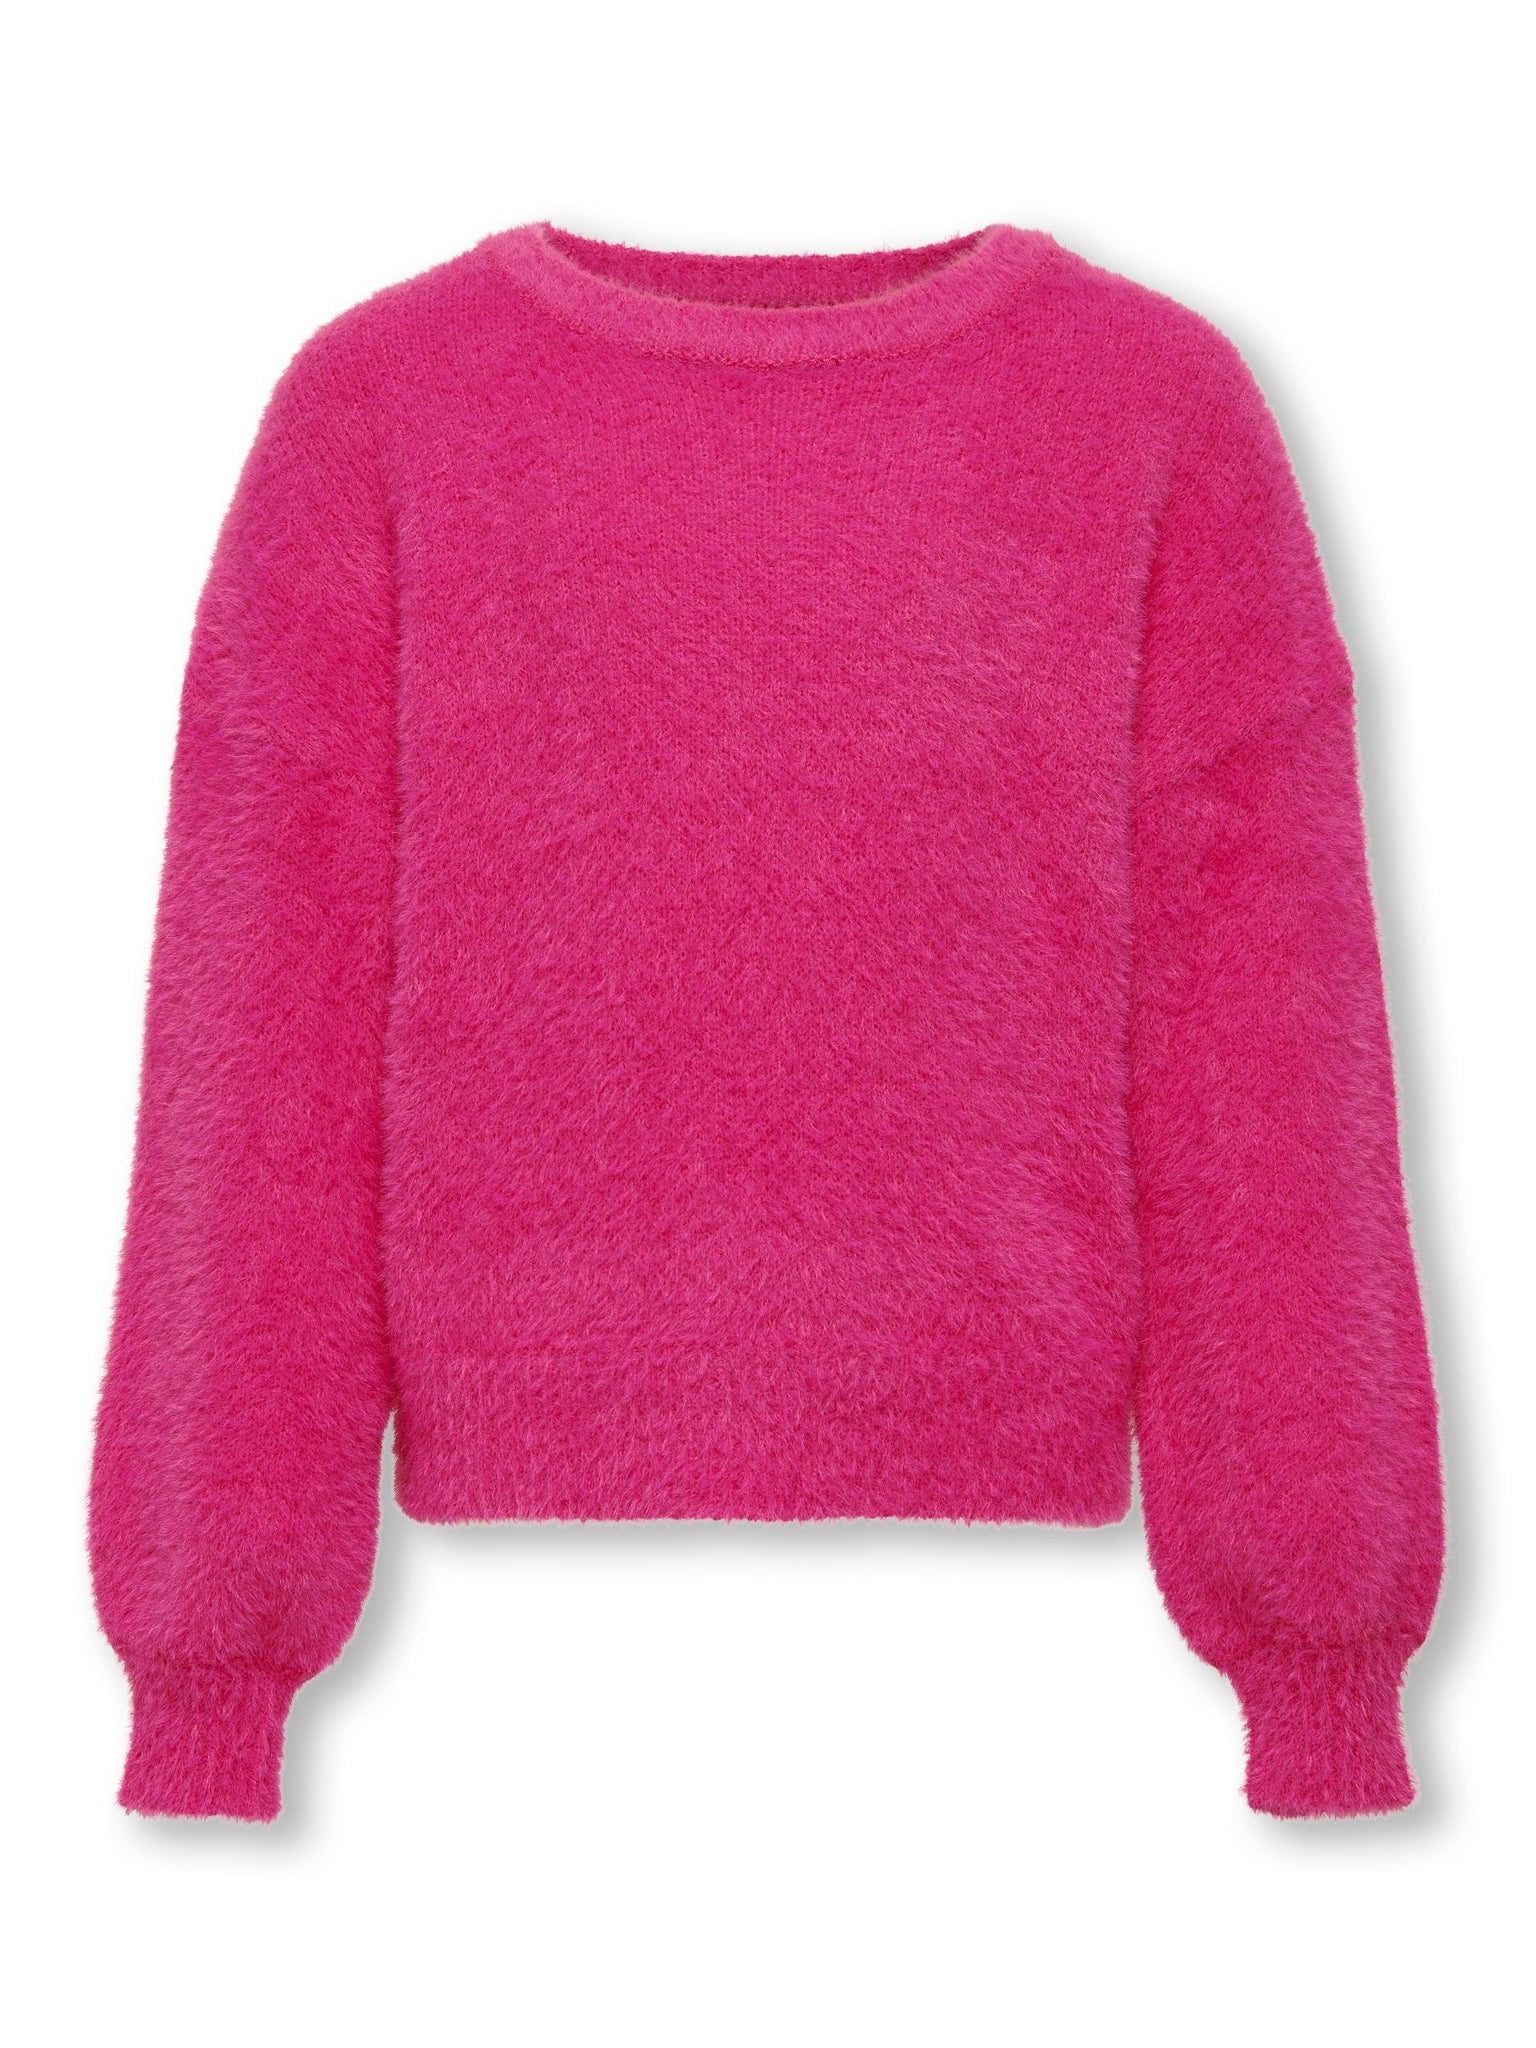 Kids Only Knitted O-Neck Pullover in Pink